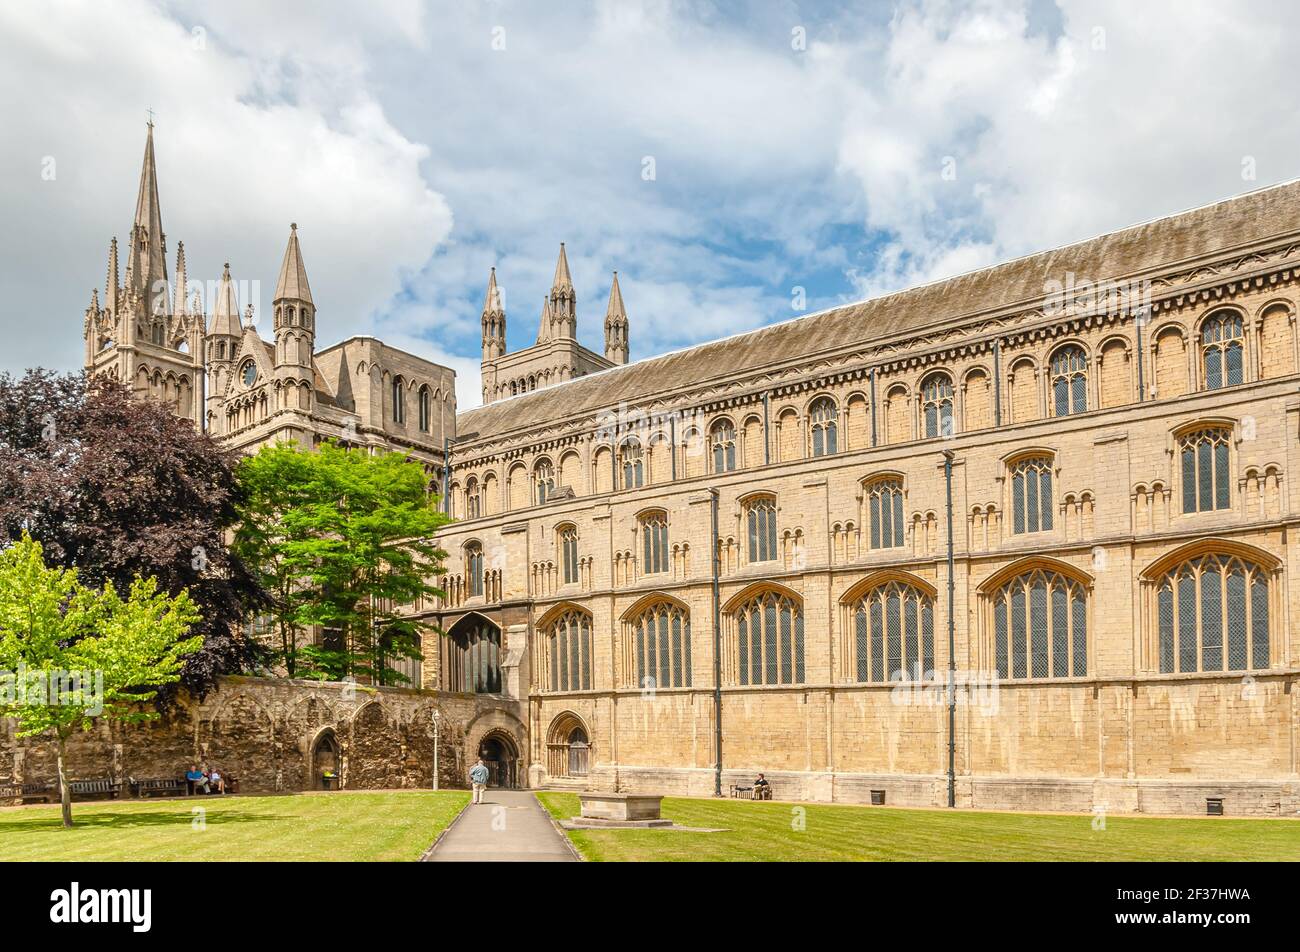 Peterborough Cathedral oder die Cathedral Church of St Peter, Northamptonshire, England, Großbritannien Stockfoto